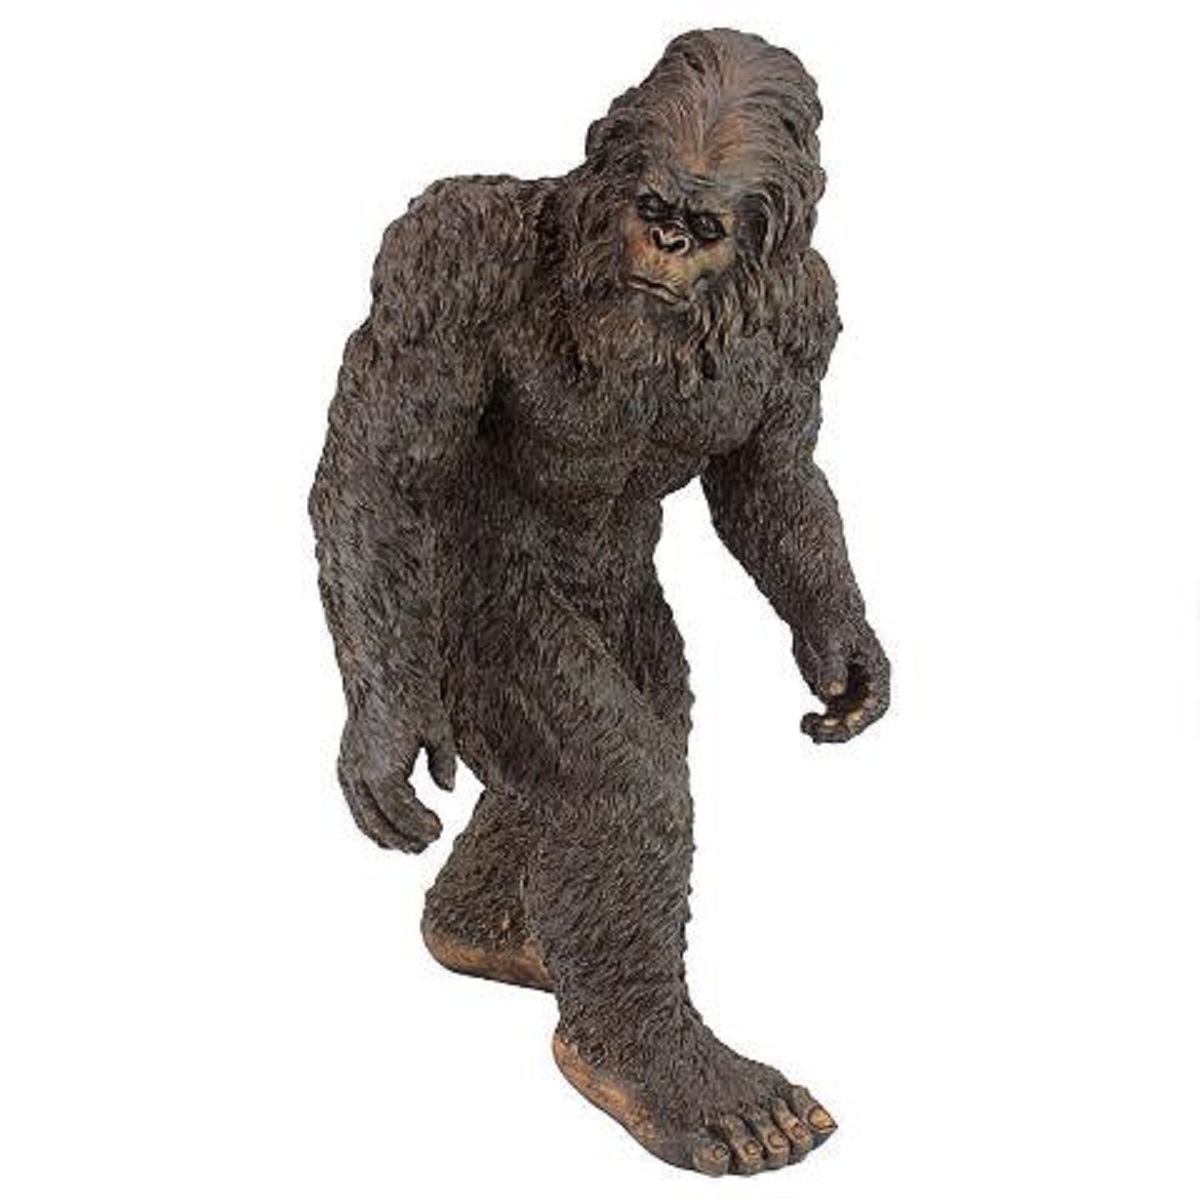 Outdoor Living and Style 28.5" Large Bigfoot Hand Painted Outdoor Garden Statue